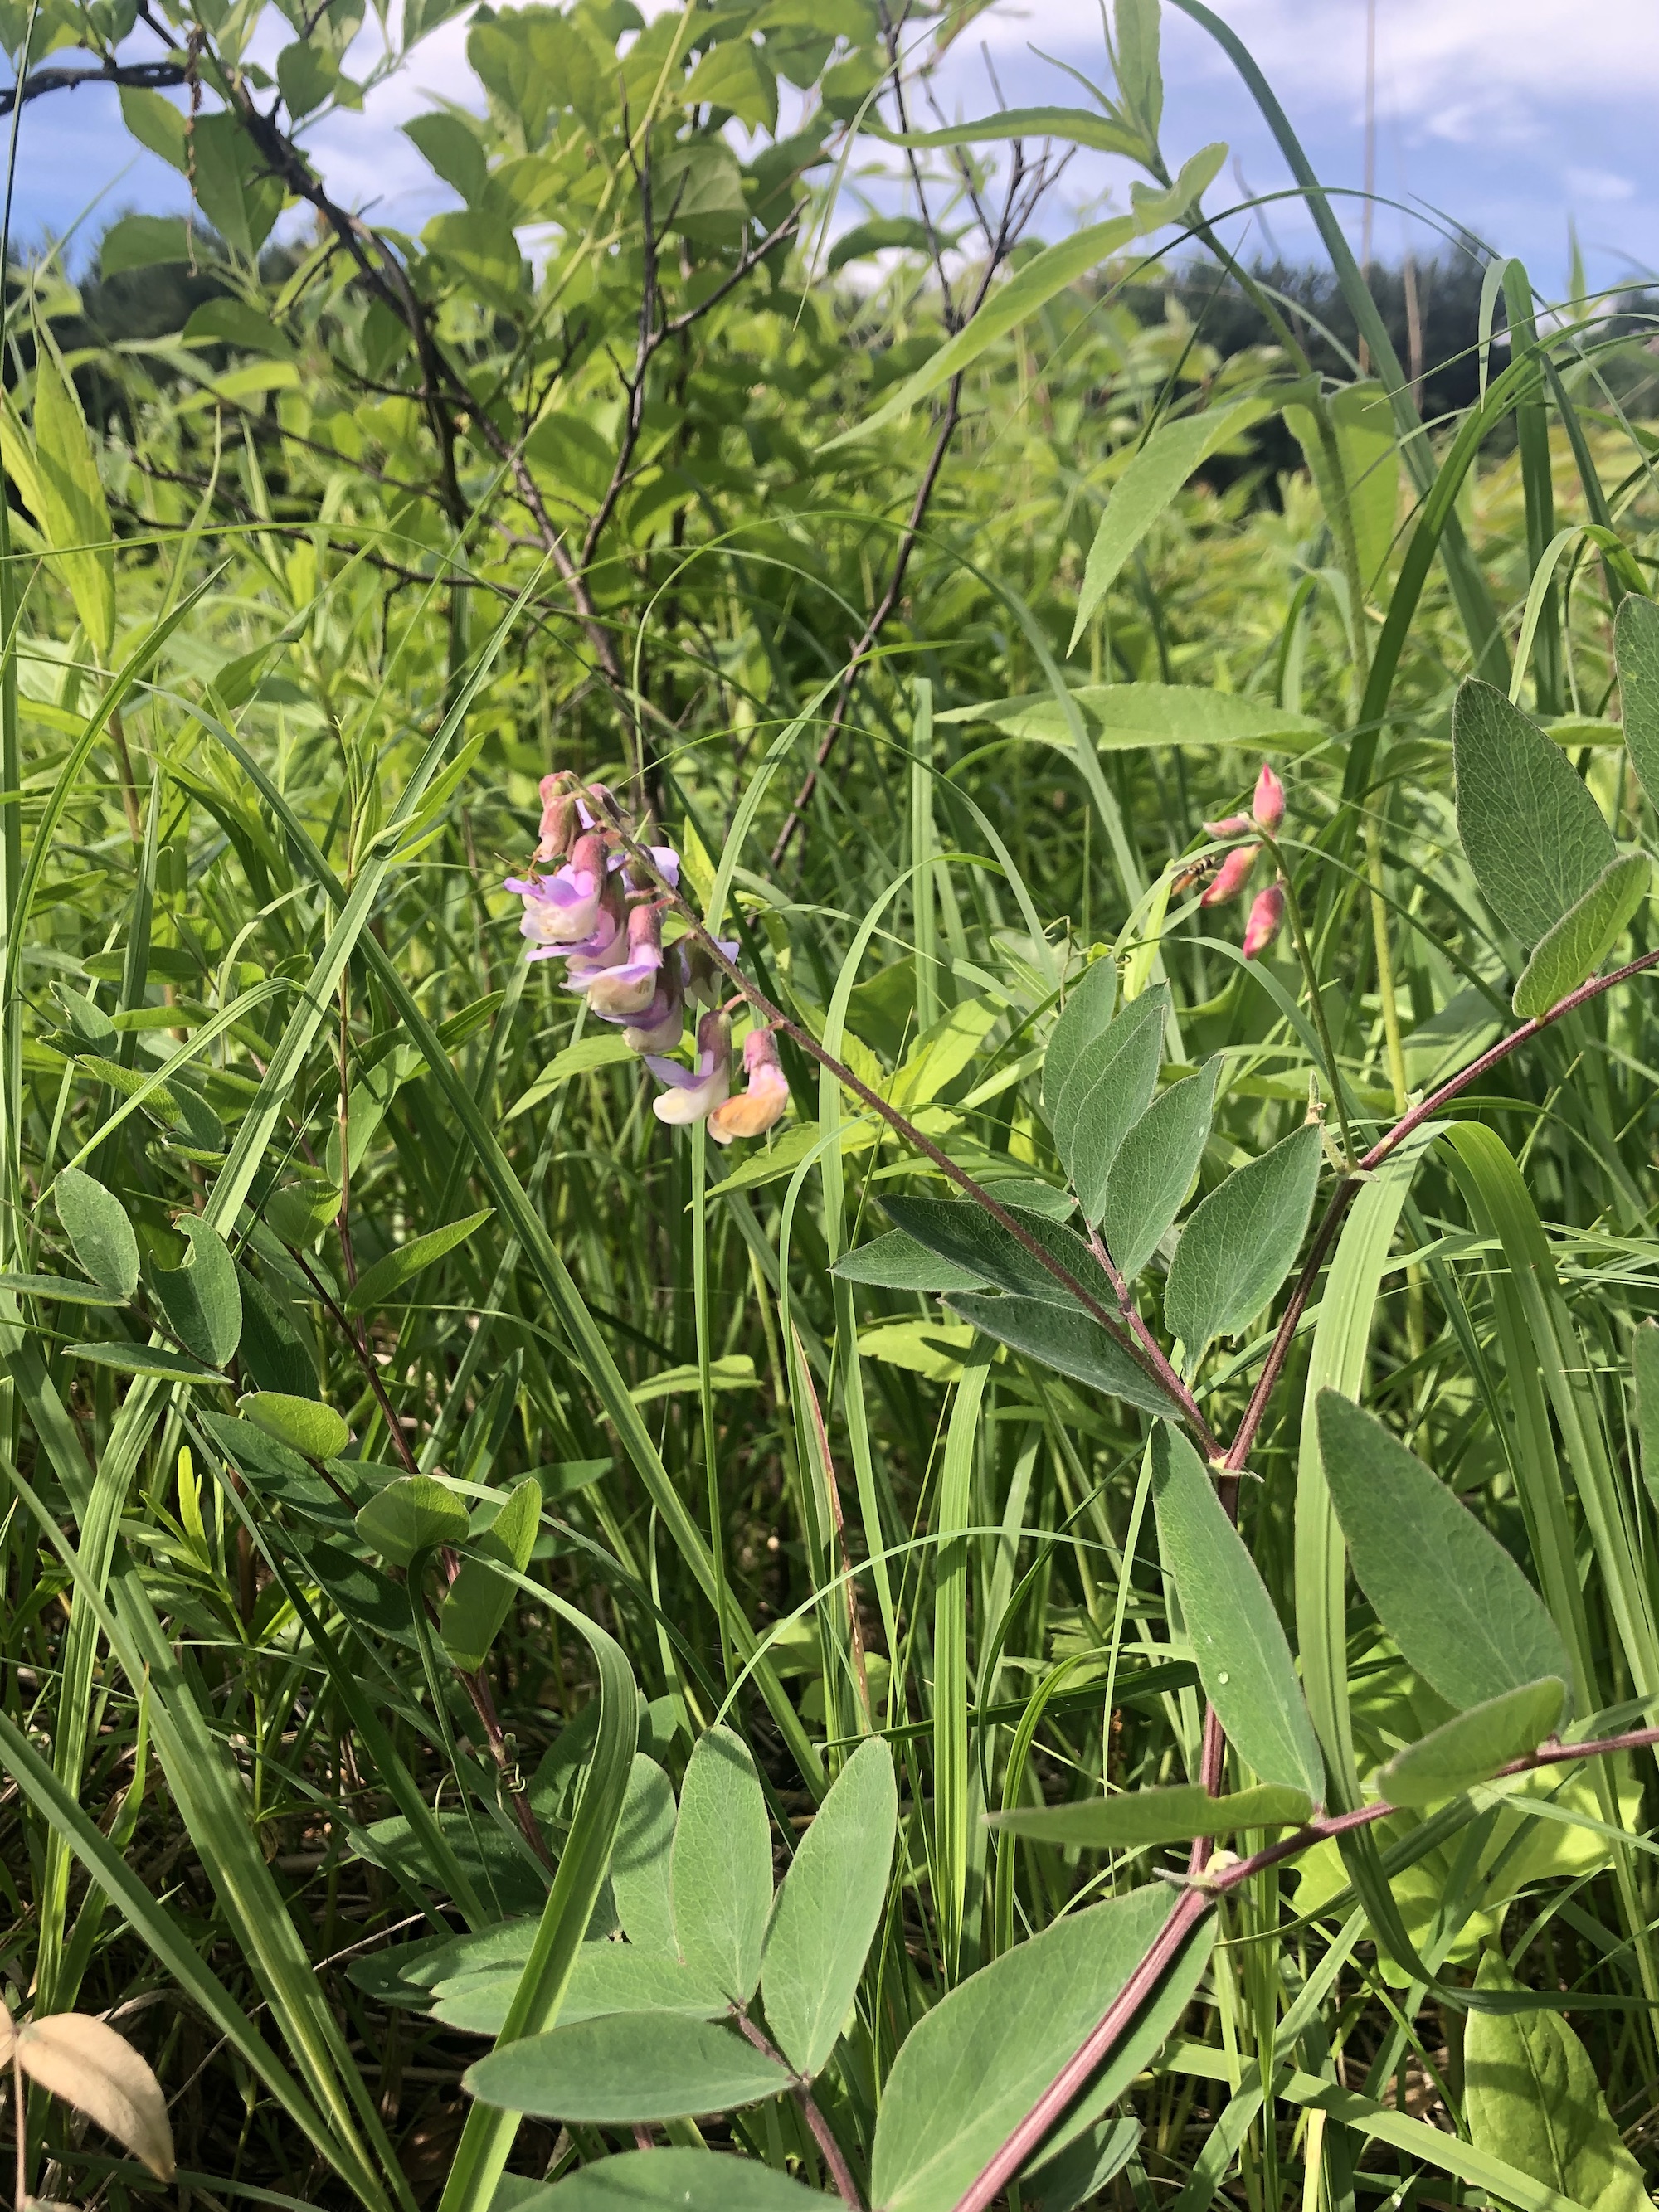 Veiny Pea in the Curtis Prairie in the University of Wisconsin-Madison Arboretum in Madison, Wisconsin on June 9, 2022.